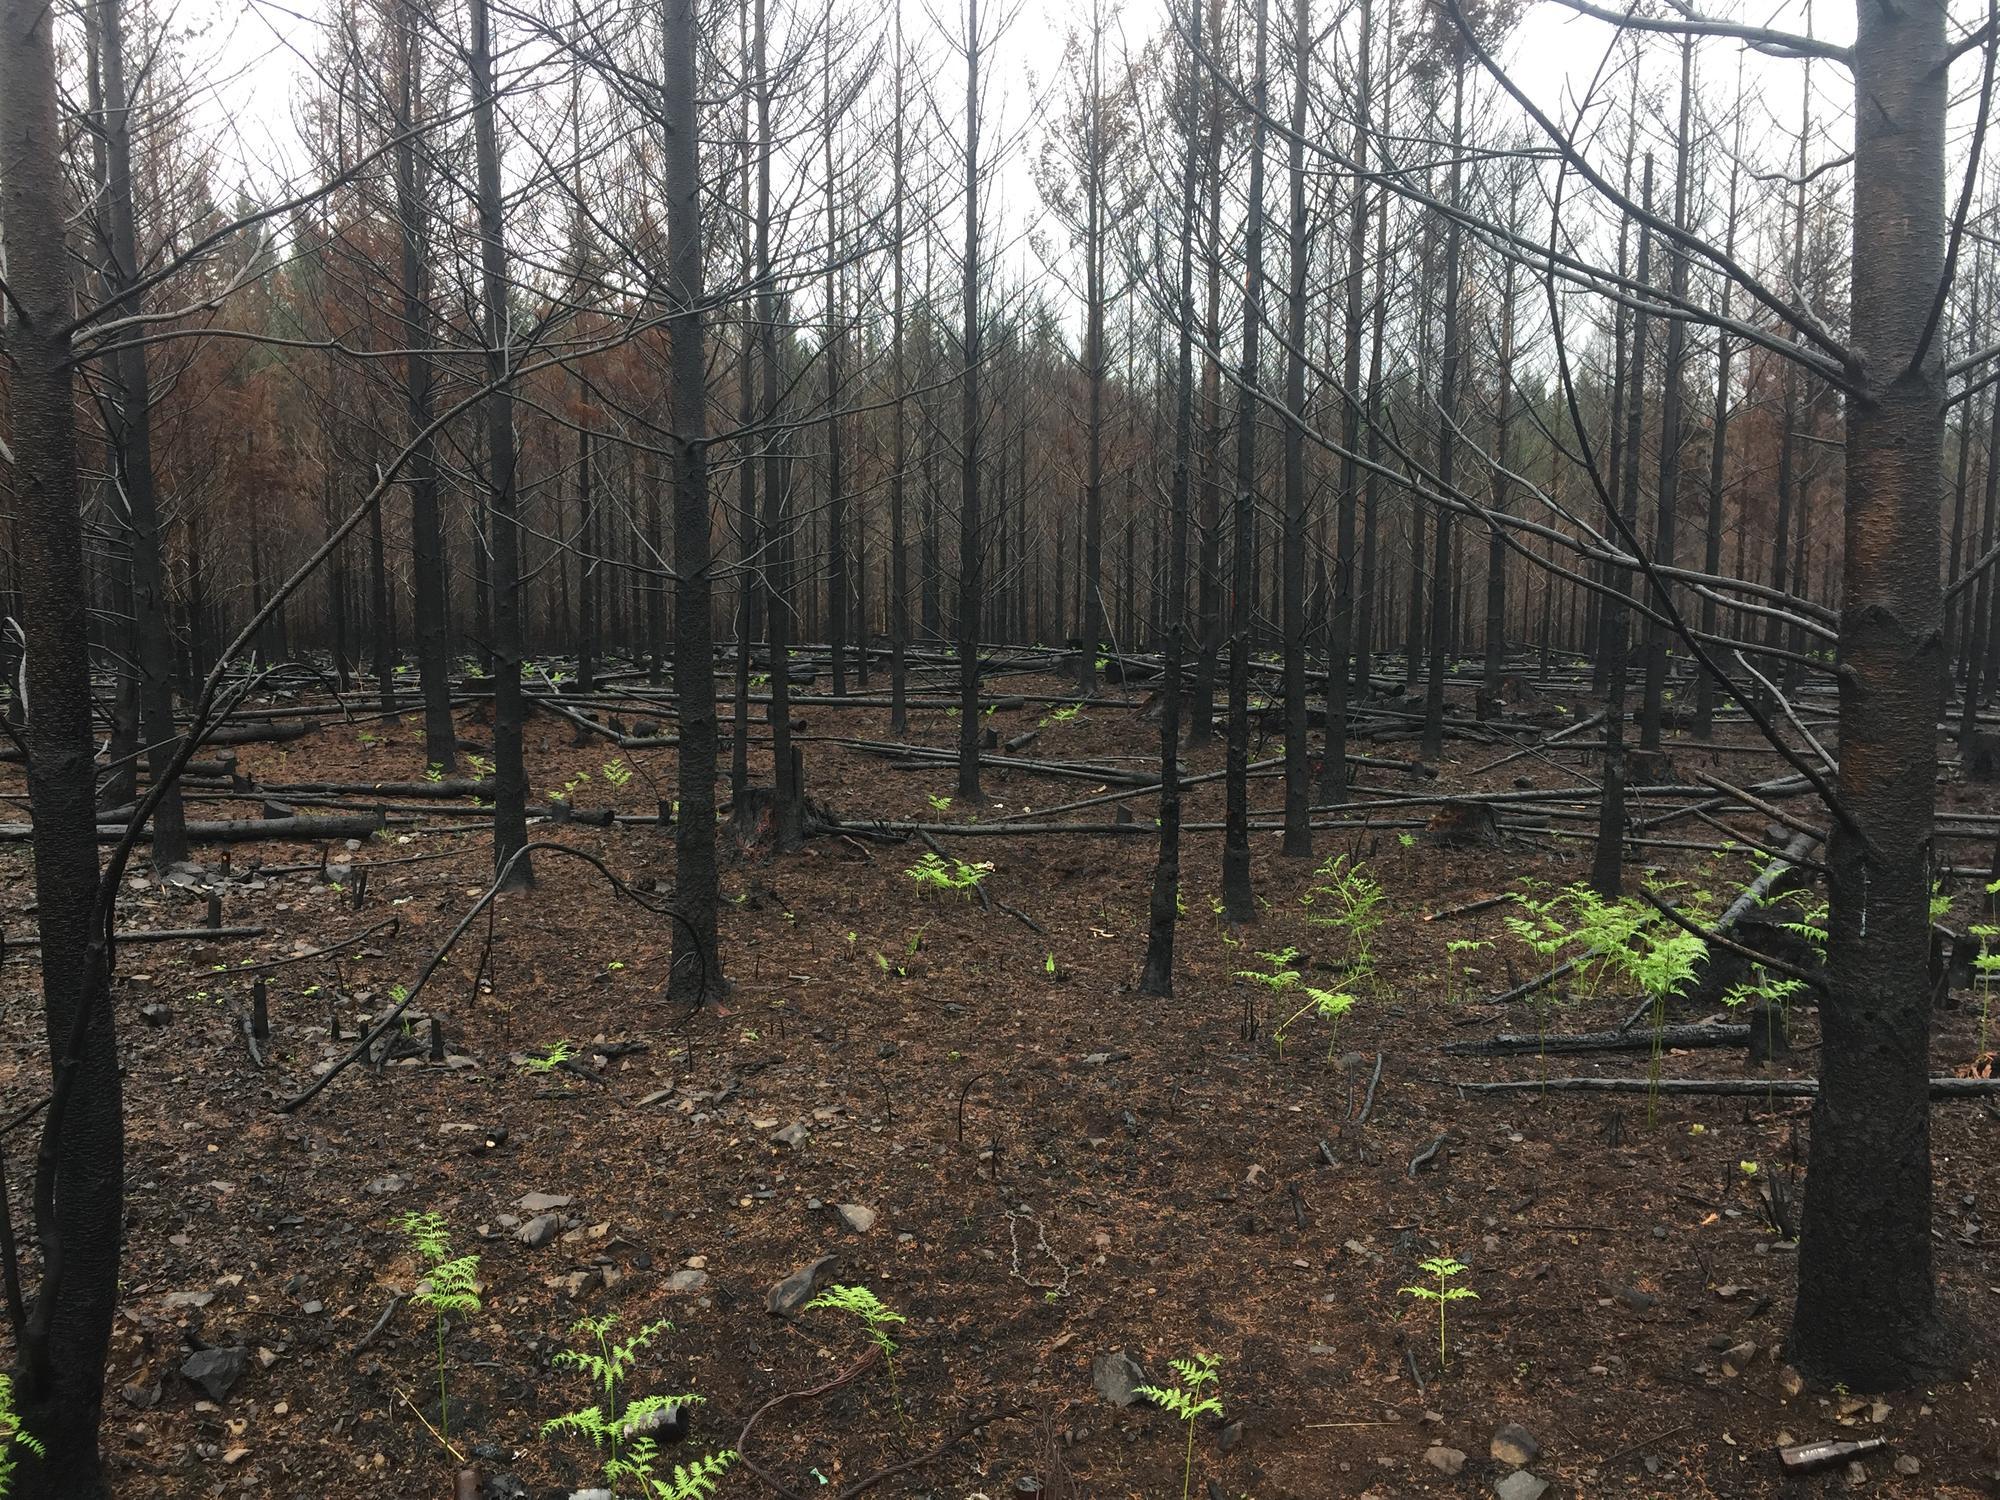 A burned stand of young trees creates a stark landscape.